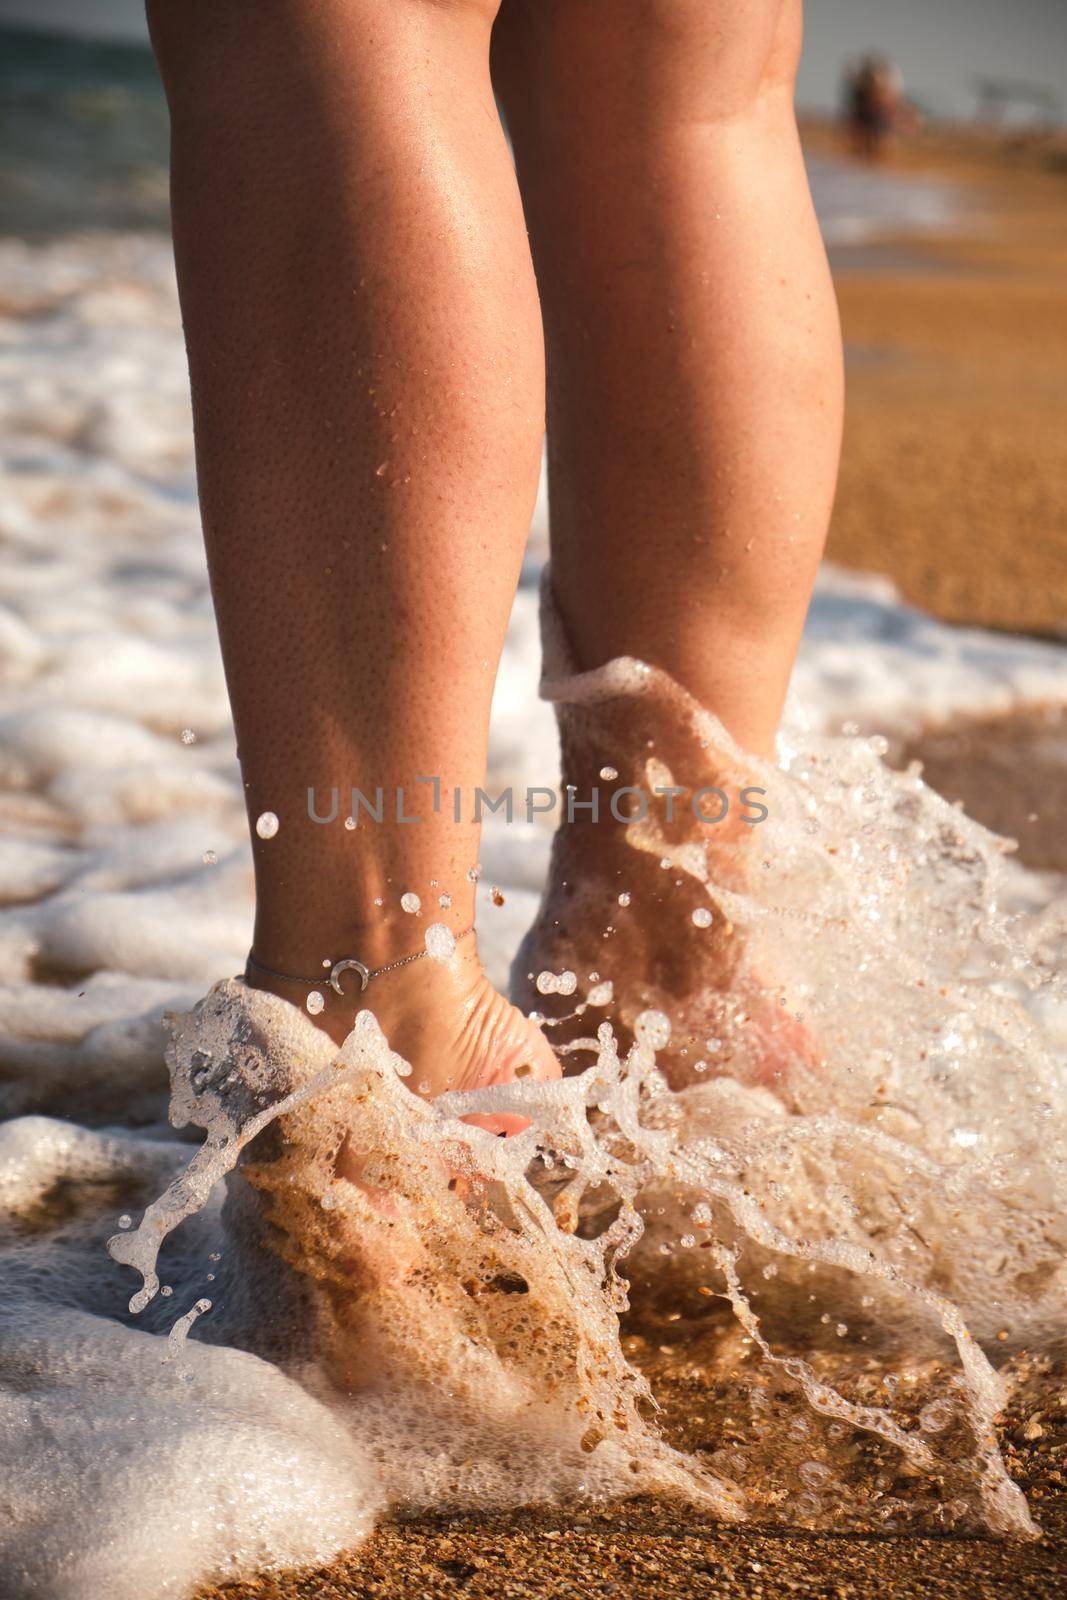 The woman's legs close up. Barefoot on the sand and the sea shore. A woman's feet a woman walks along the coast of the sea. lifestyle